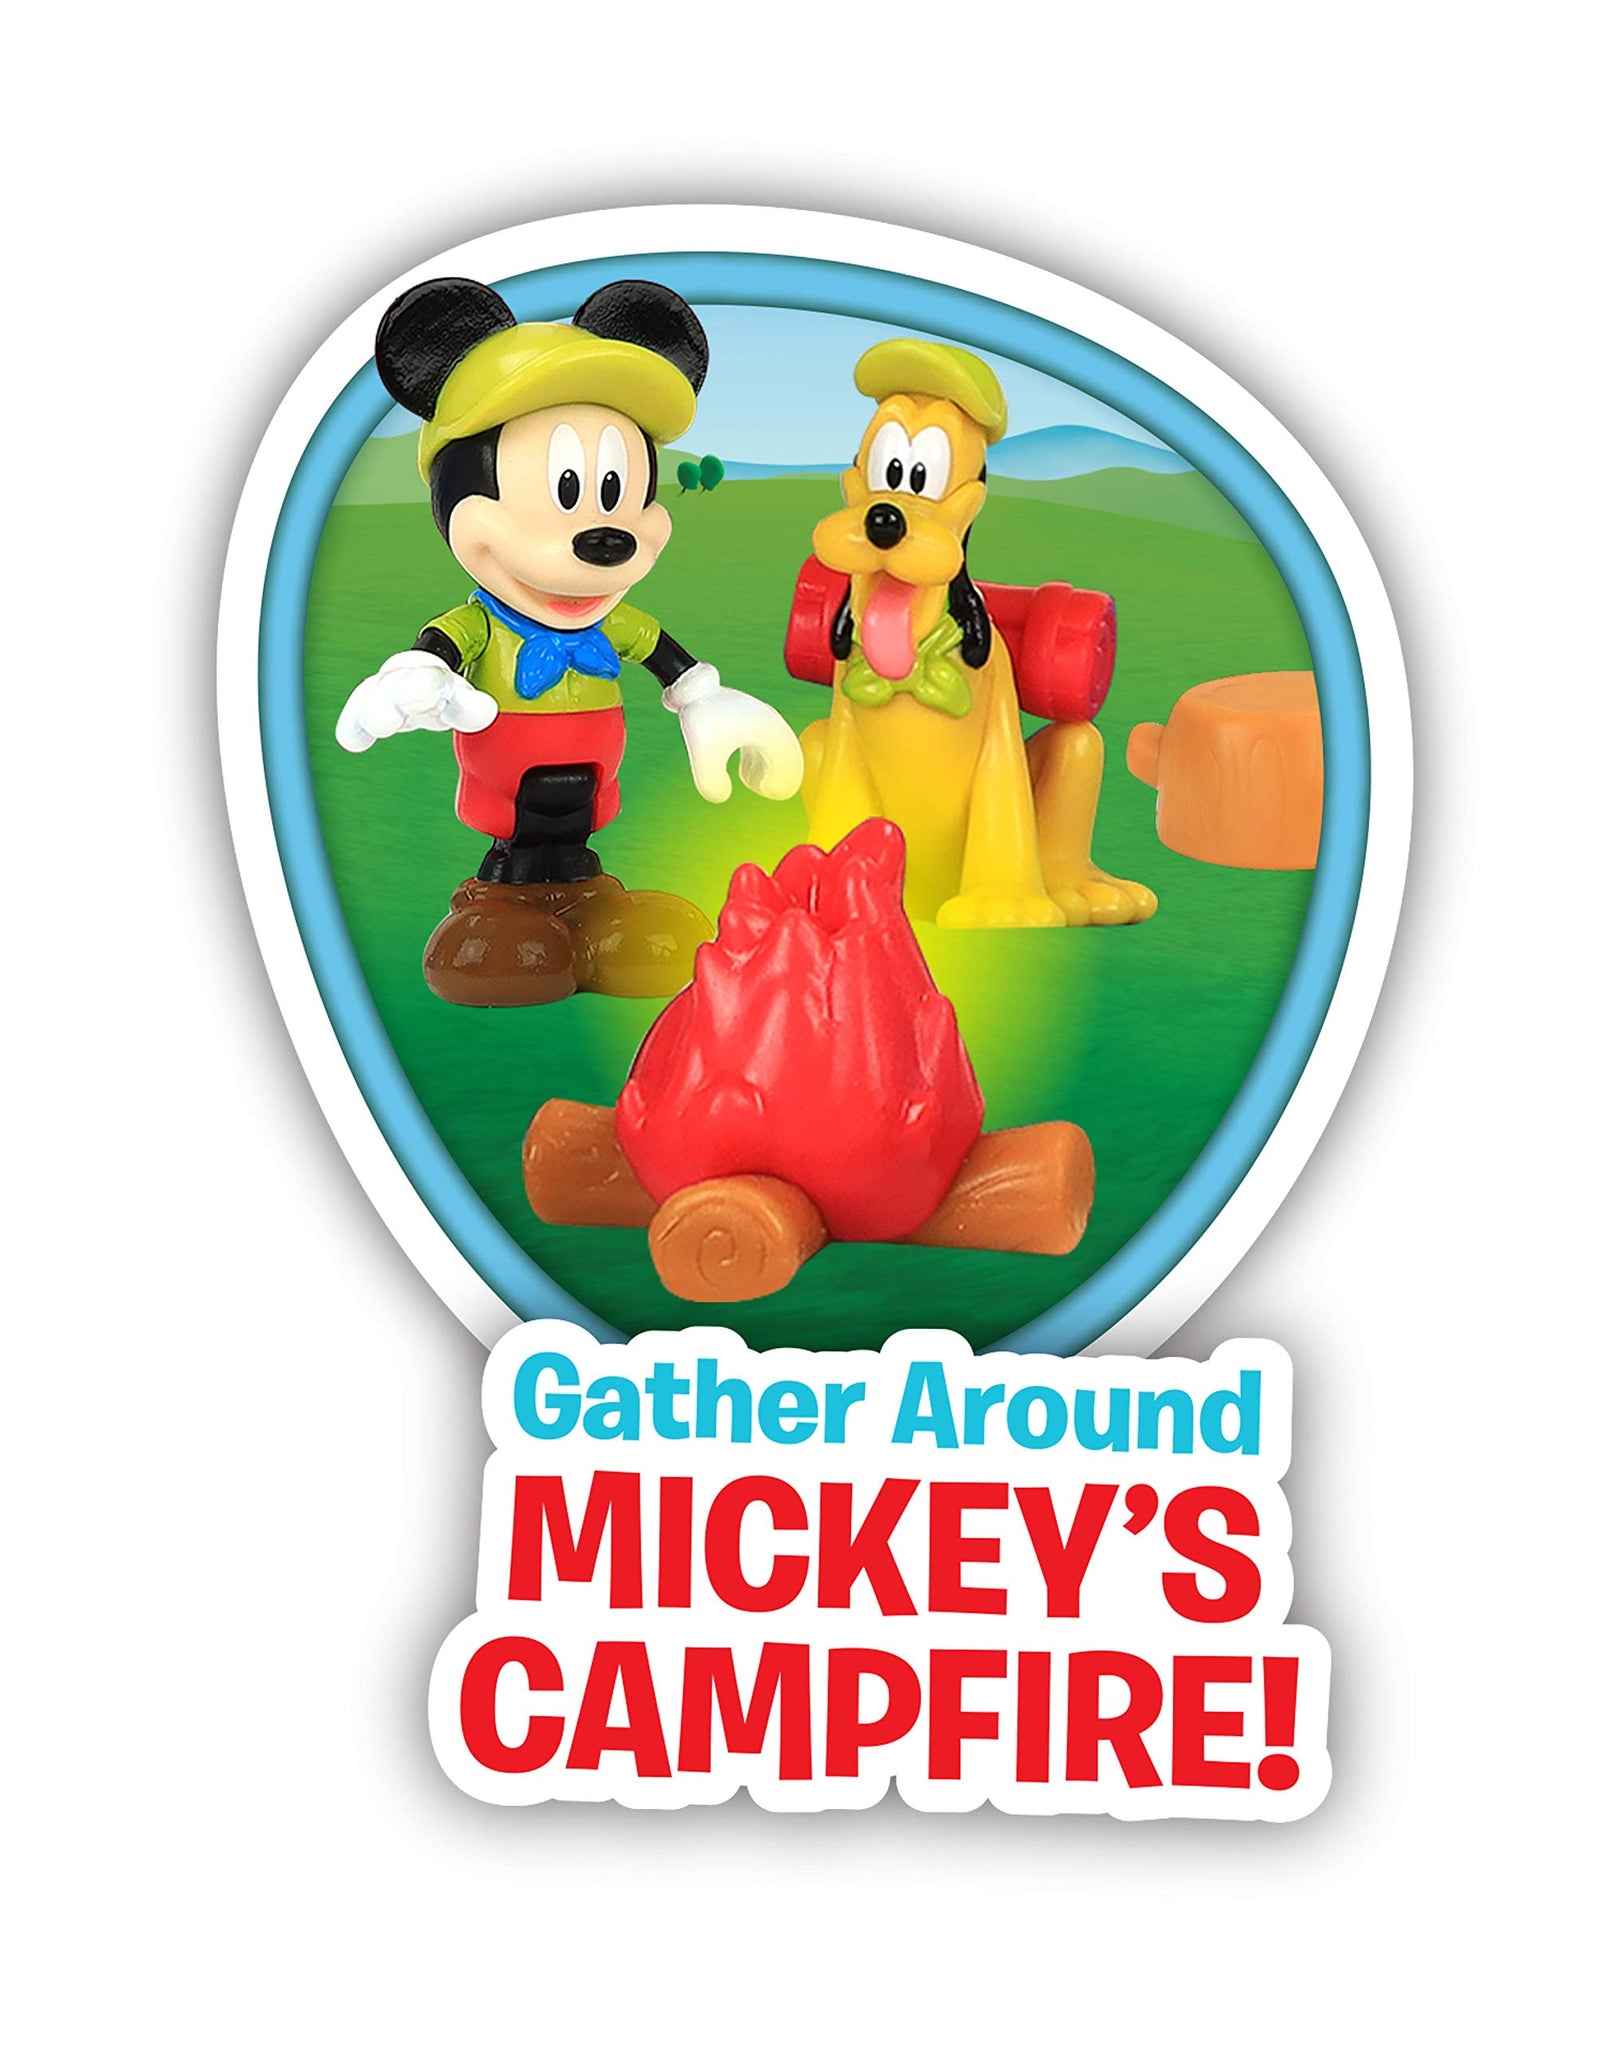 Disney Junior Mickey Mouse Outdoor and Explore Camper, Lights and Sounds Playset, Amazon Exclusive, by Just Play